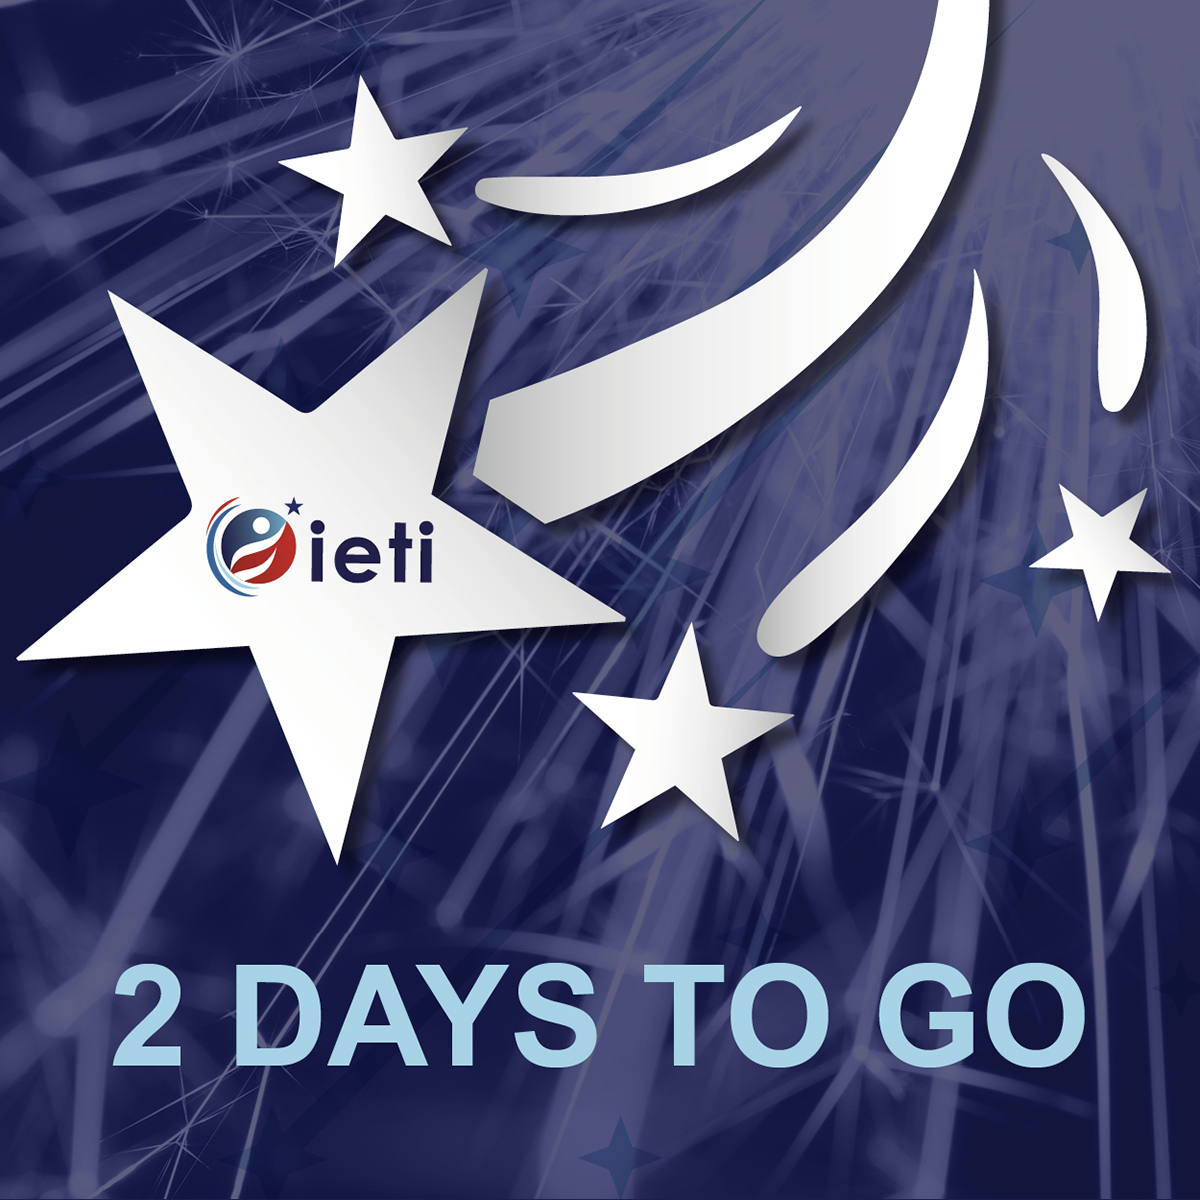 2 more days until the launch of the IETI Campus Johannesburg in Roodepoort! This is an exciting opportunity for young South Africans to become qualified artisans.

#IETI #SkillsDevelopment #artisan #electrician #millwright #plumber #welder #mechanicalfitter #carpenter #bricklayer